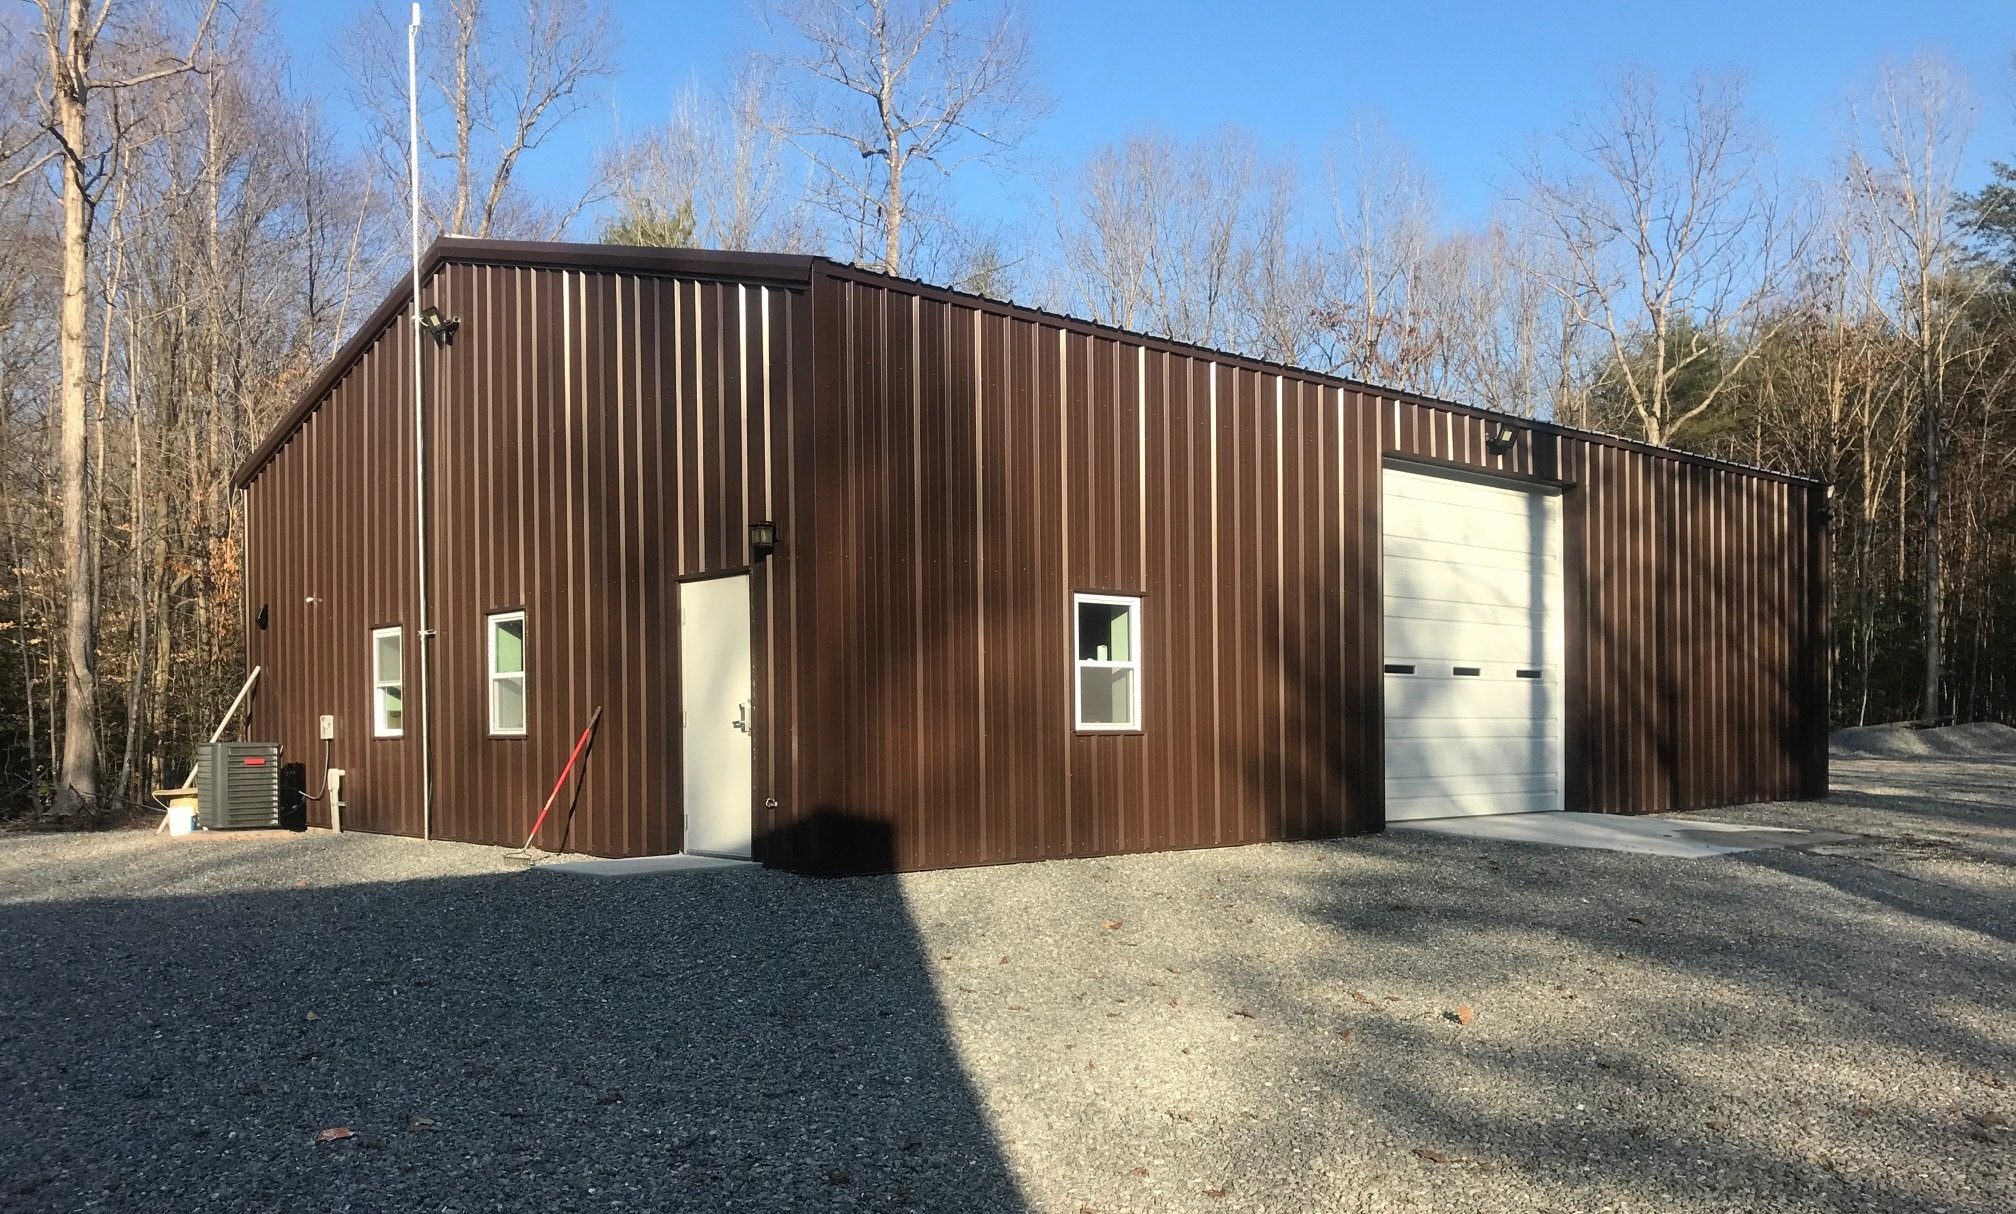 40x60 Virginia metal building being used for a workshop and garage